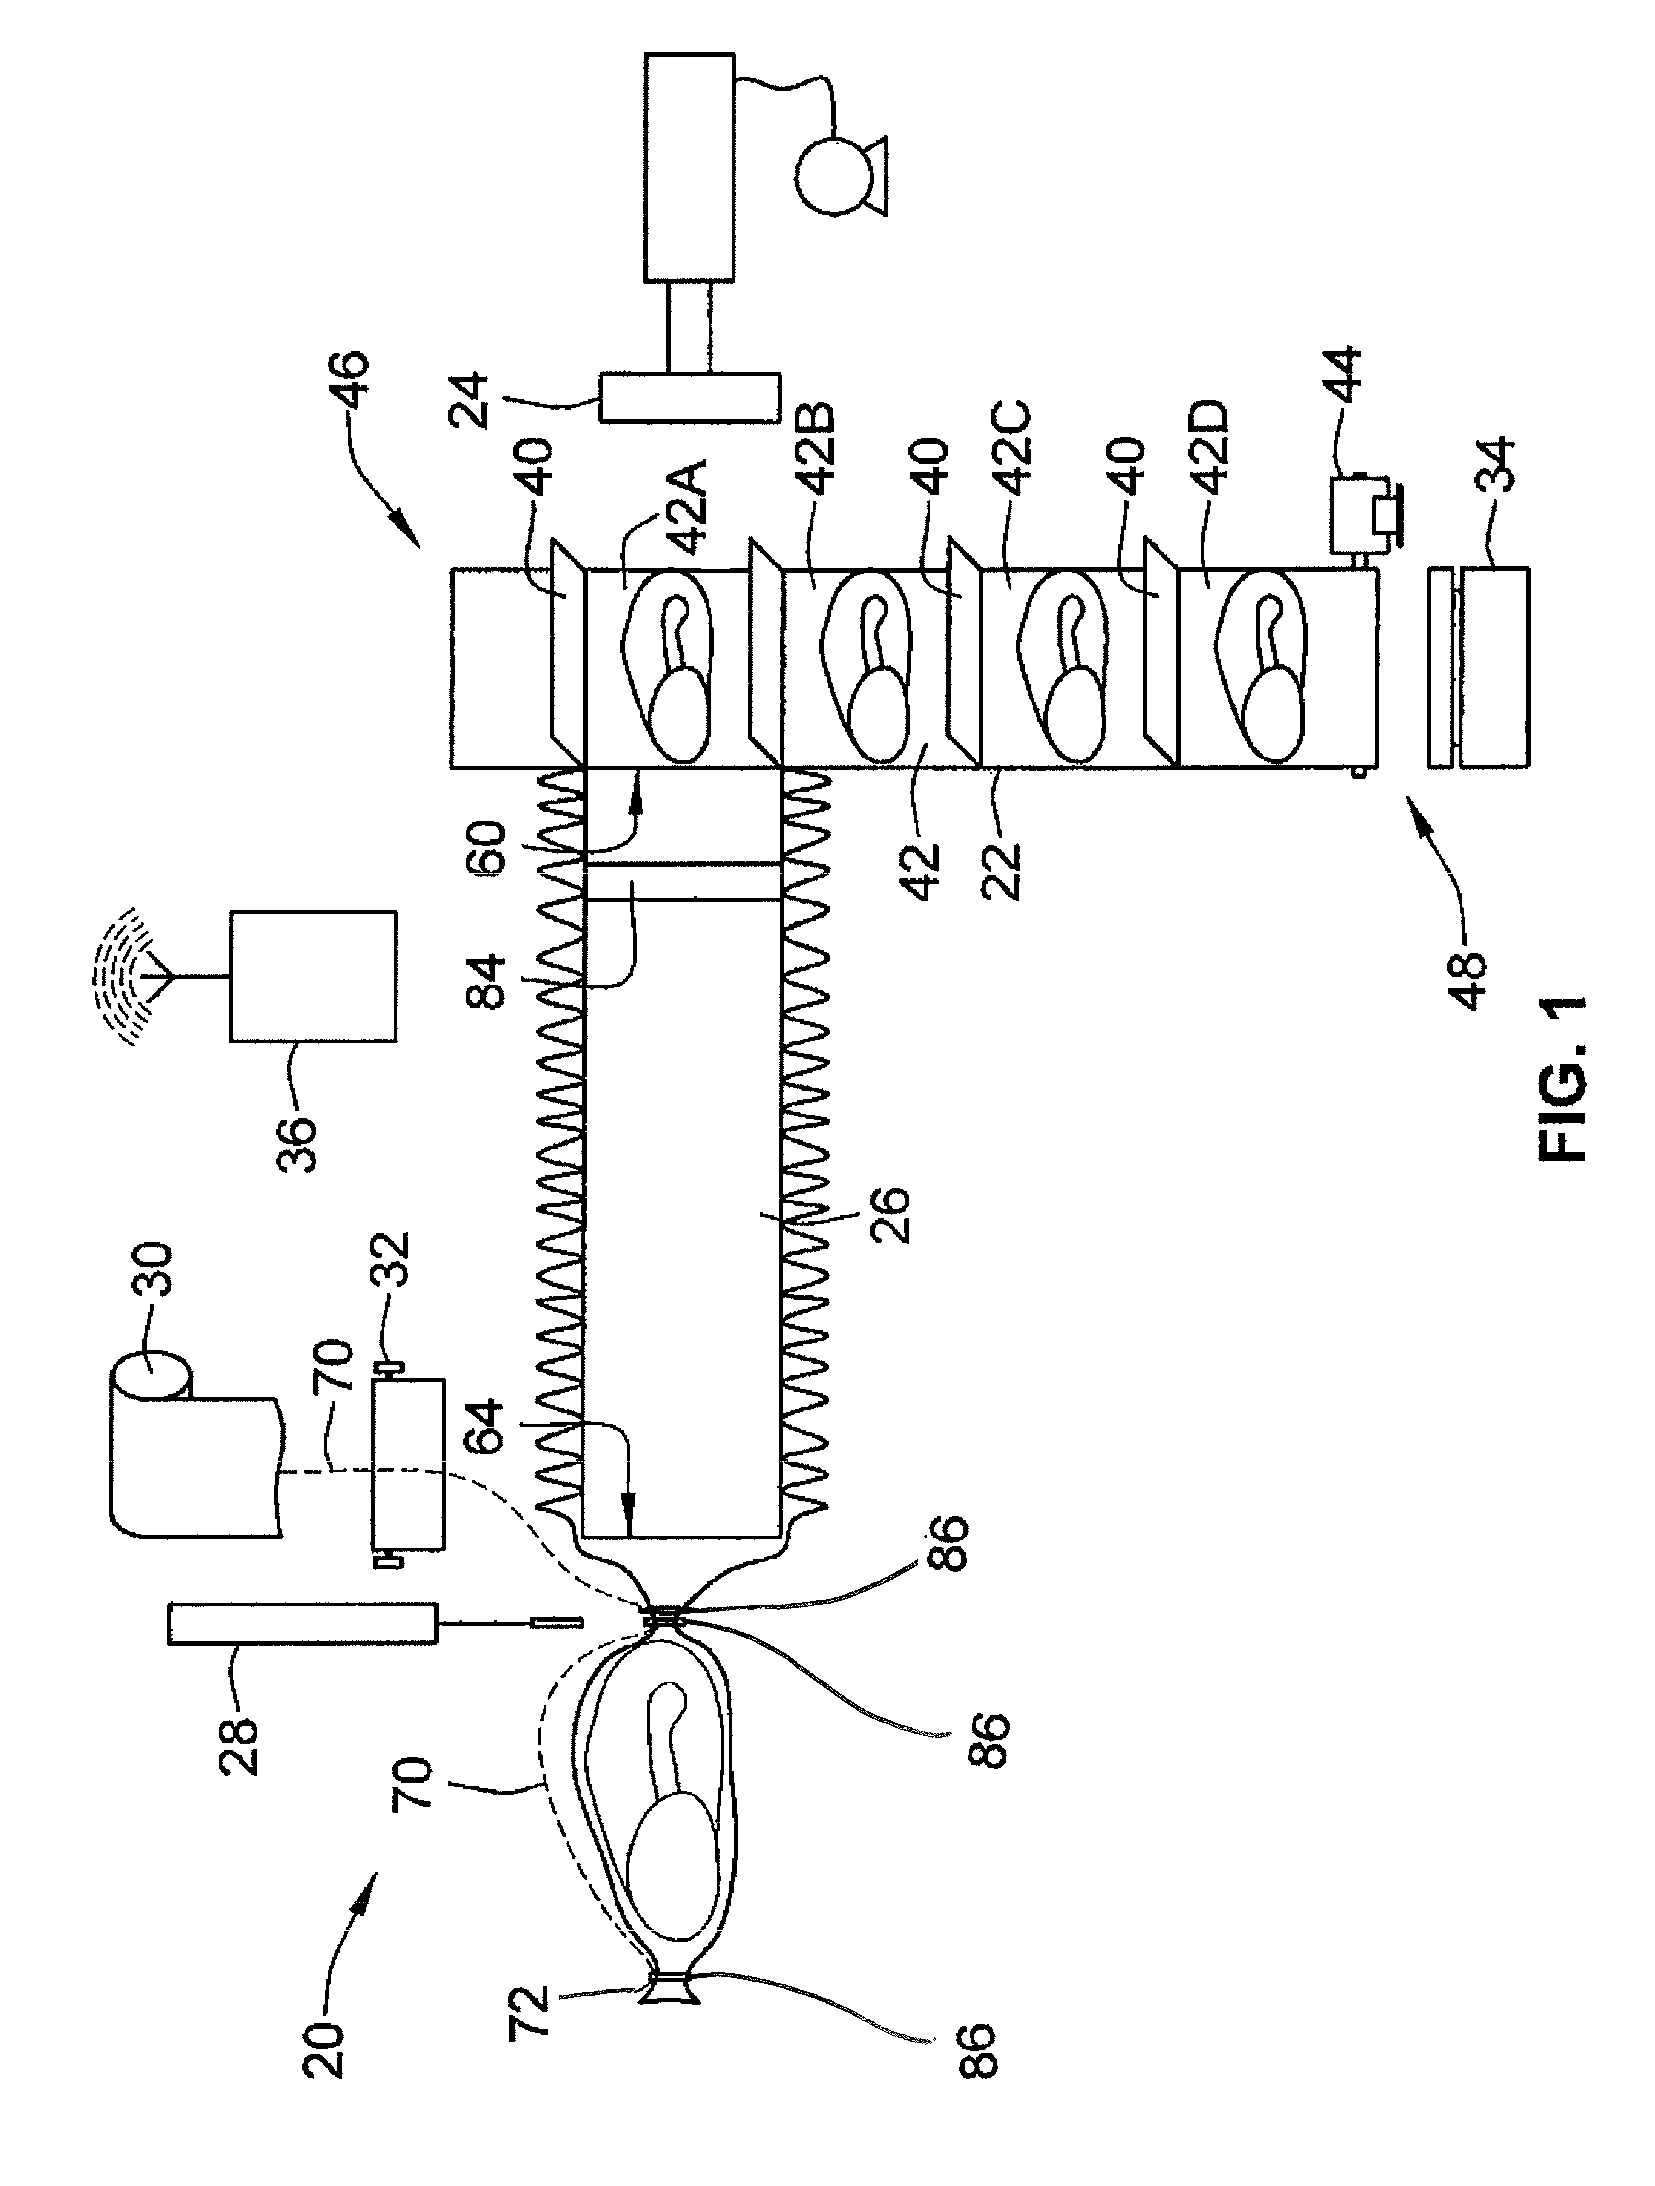 Method for enclosing products in a package having a handle